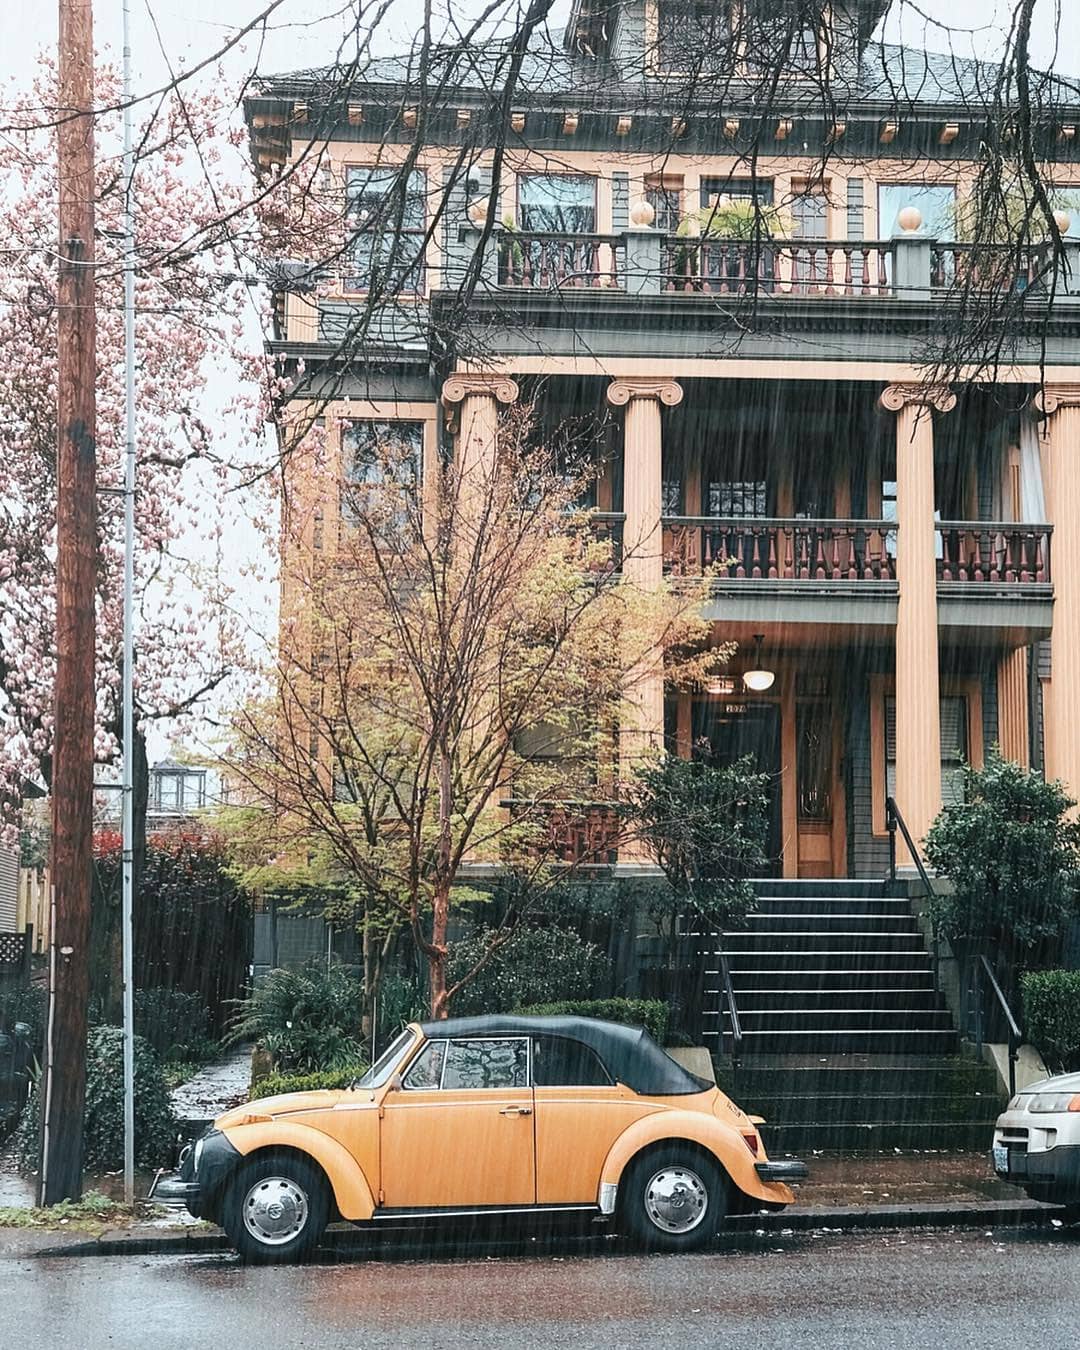 Front view of large three-story home with pillars in front and a VW Beetle parked on the street in front. Photo by Instagram user @portlandcreatives